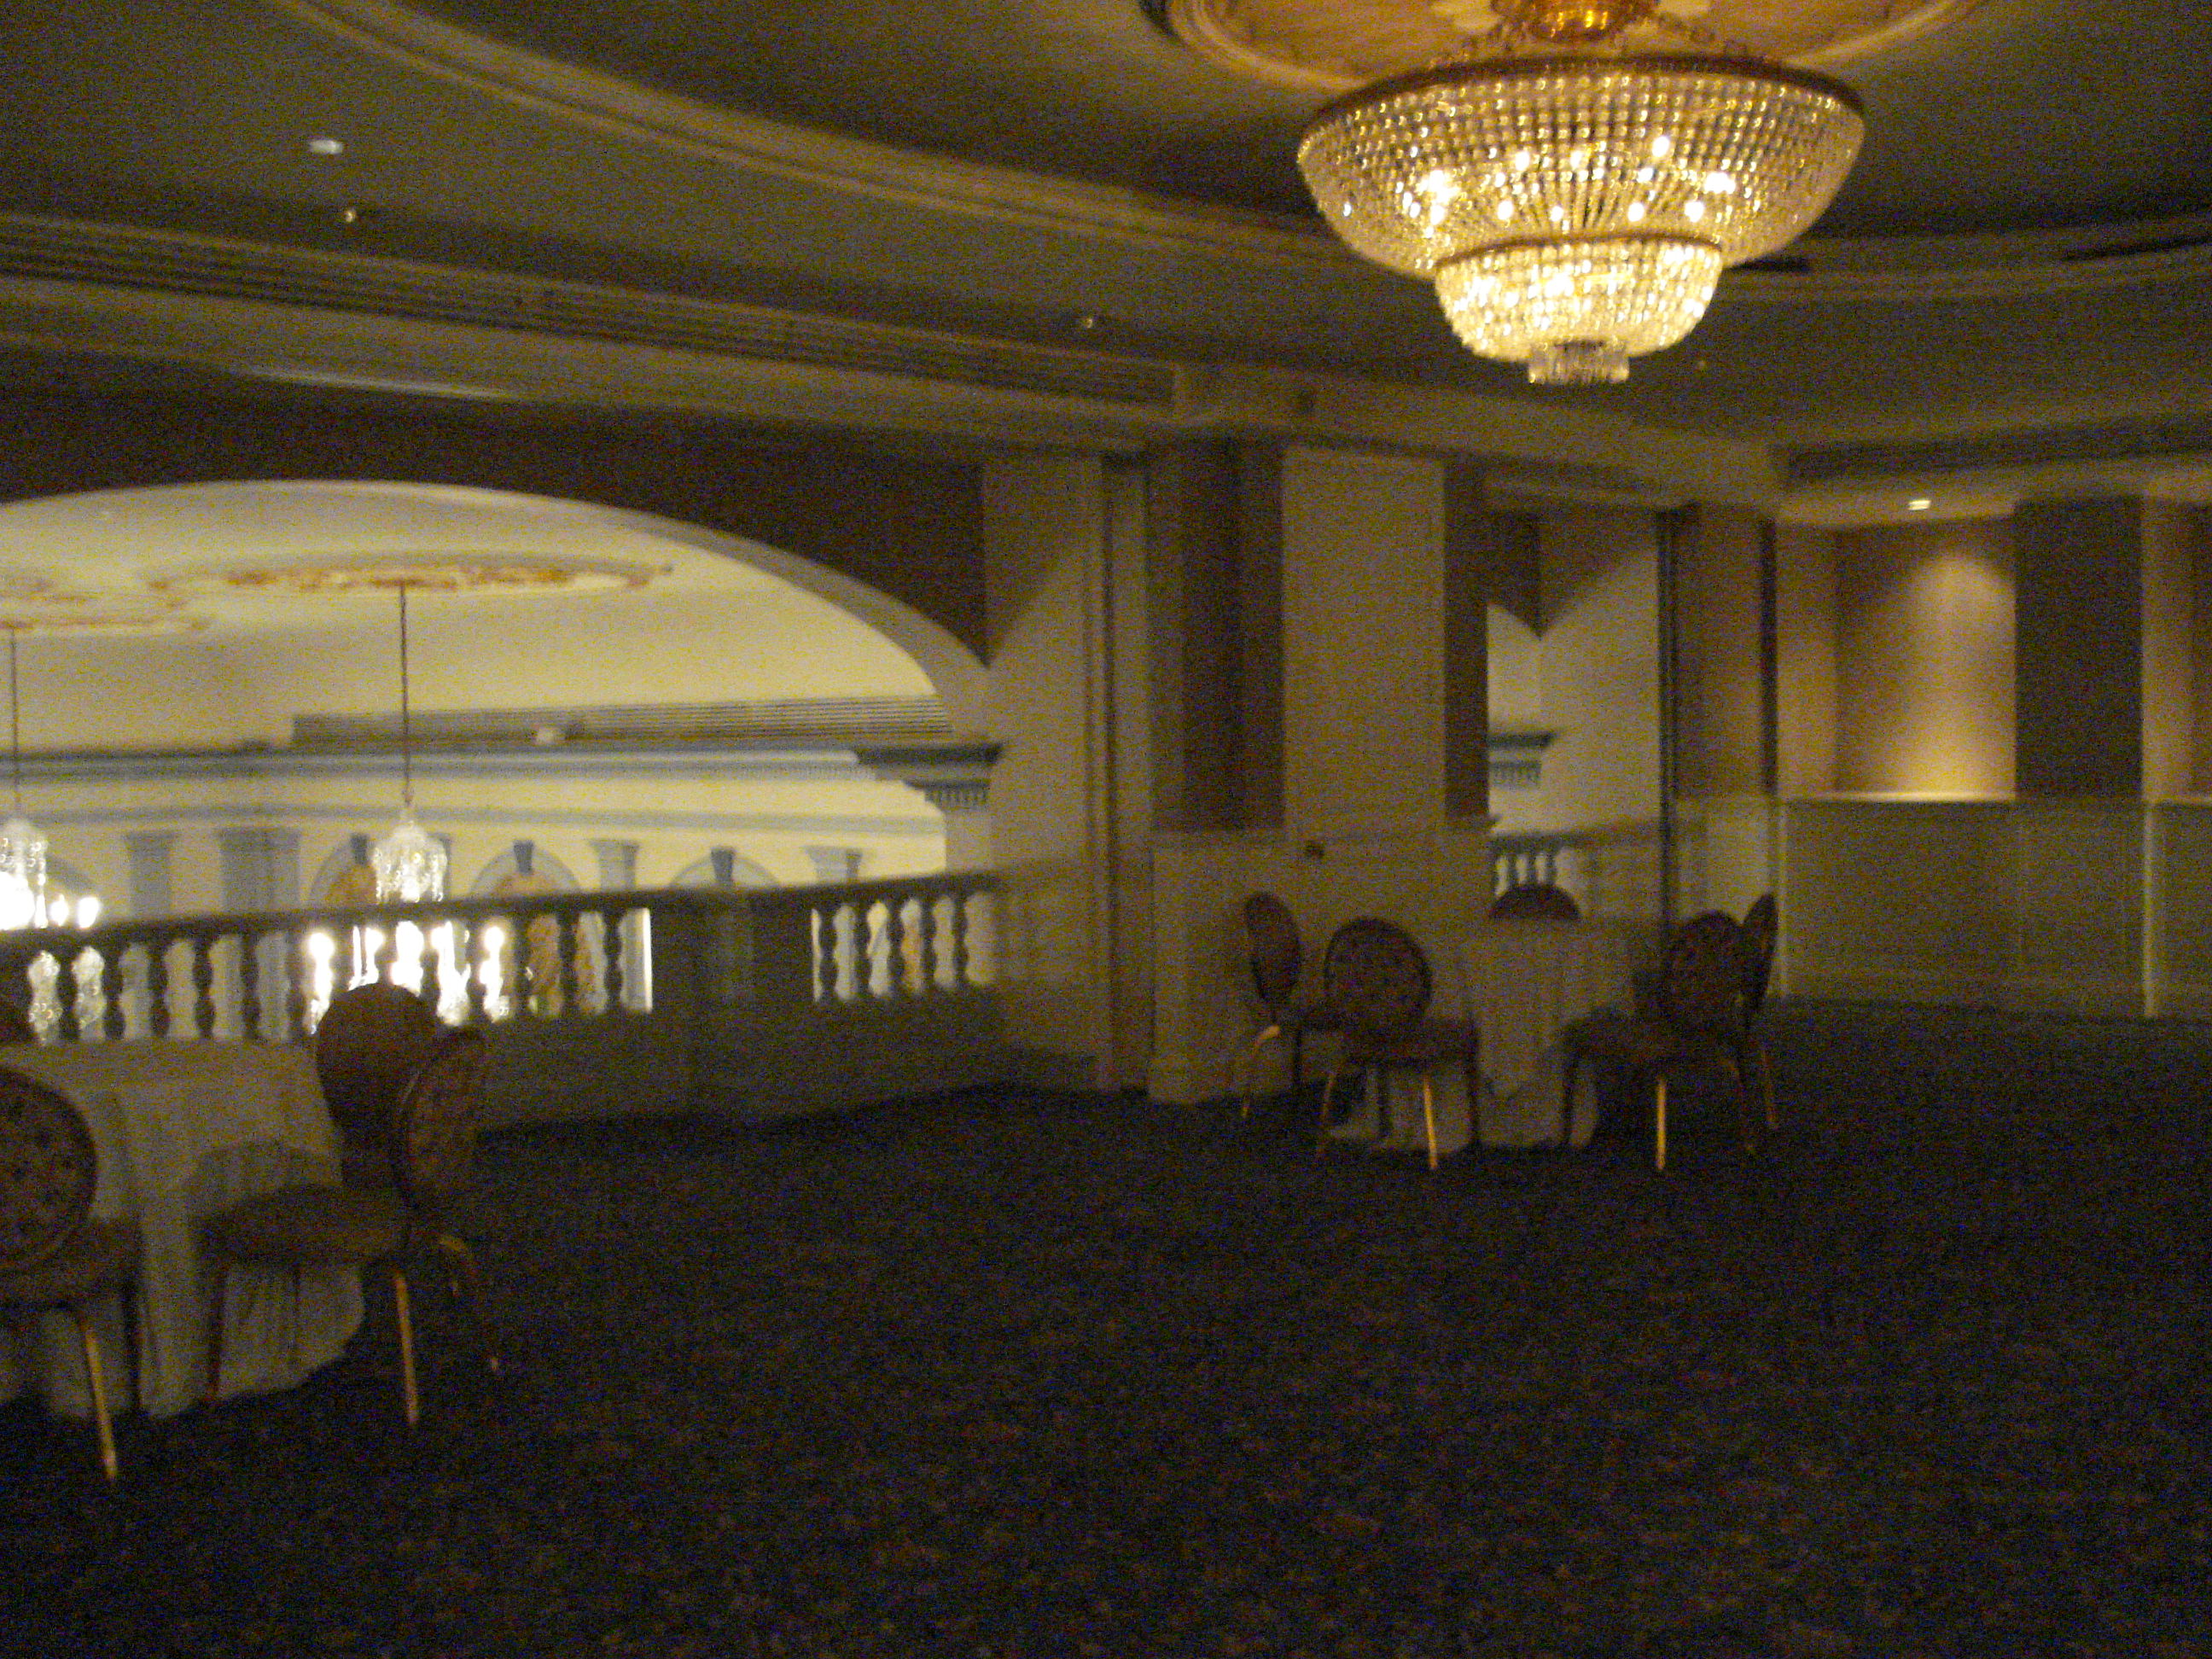 Upper balcony. You can see the ceiling of the ballroom.